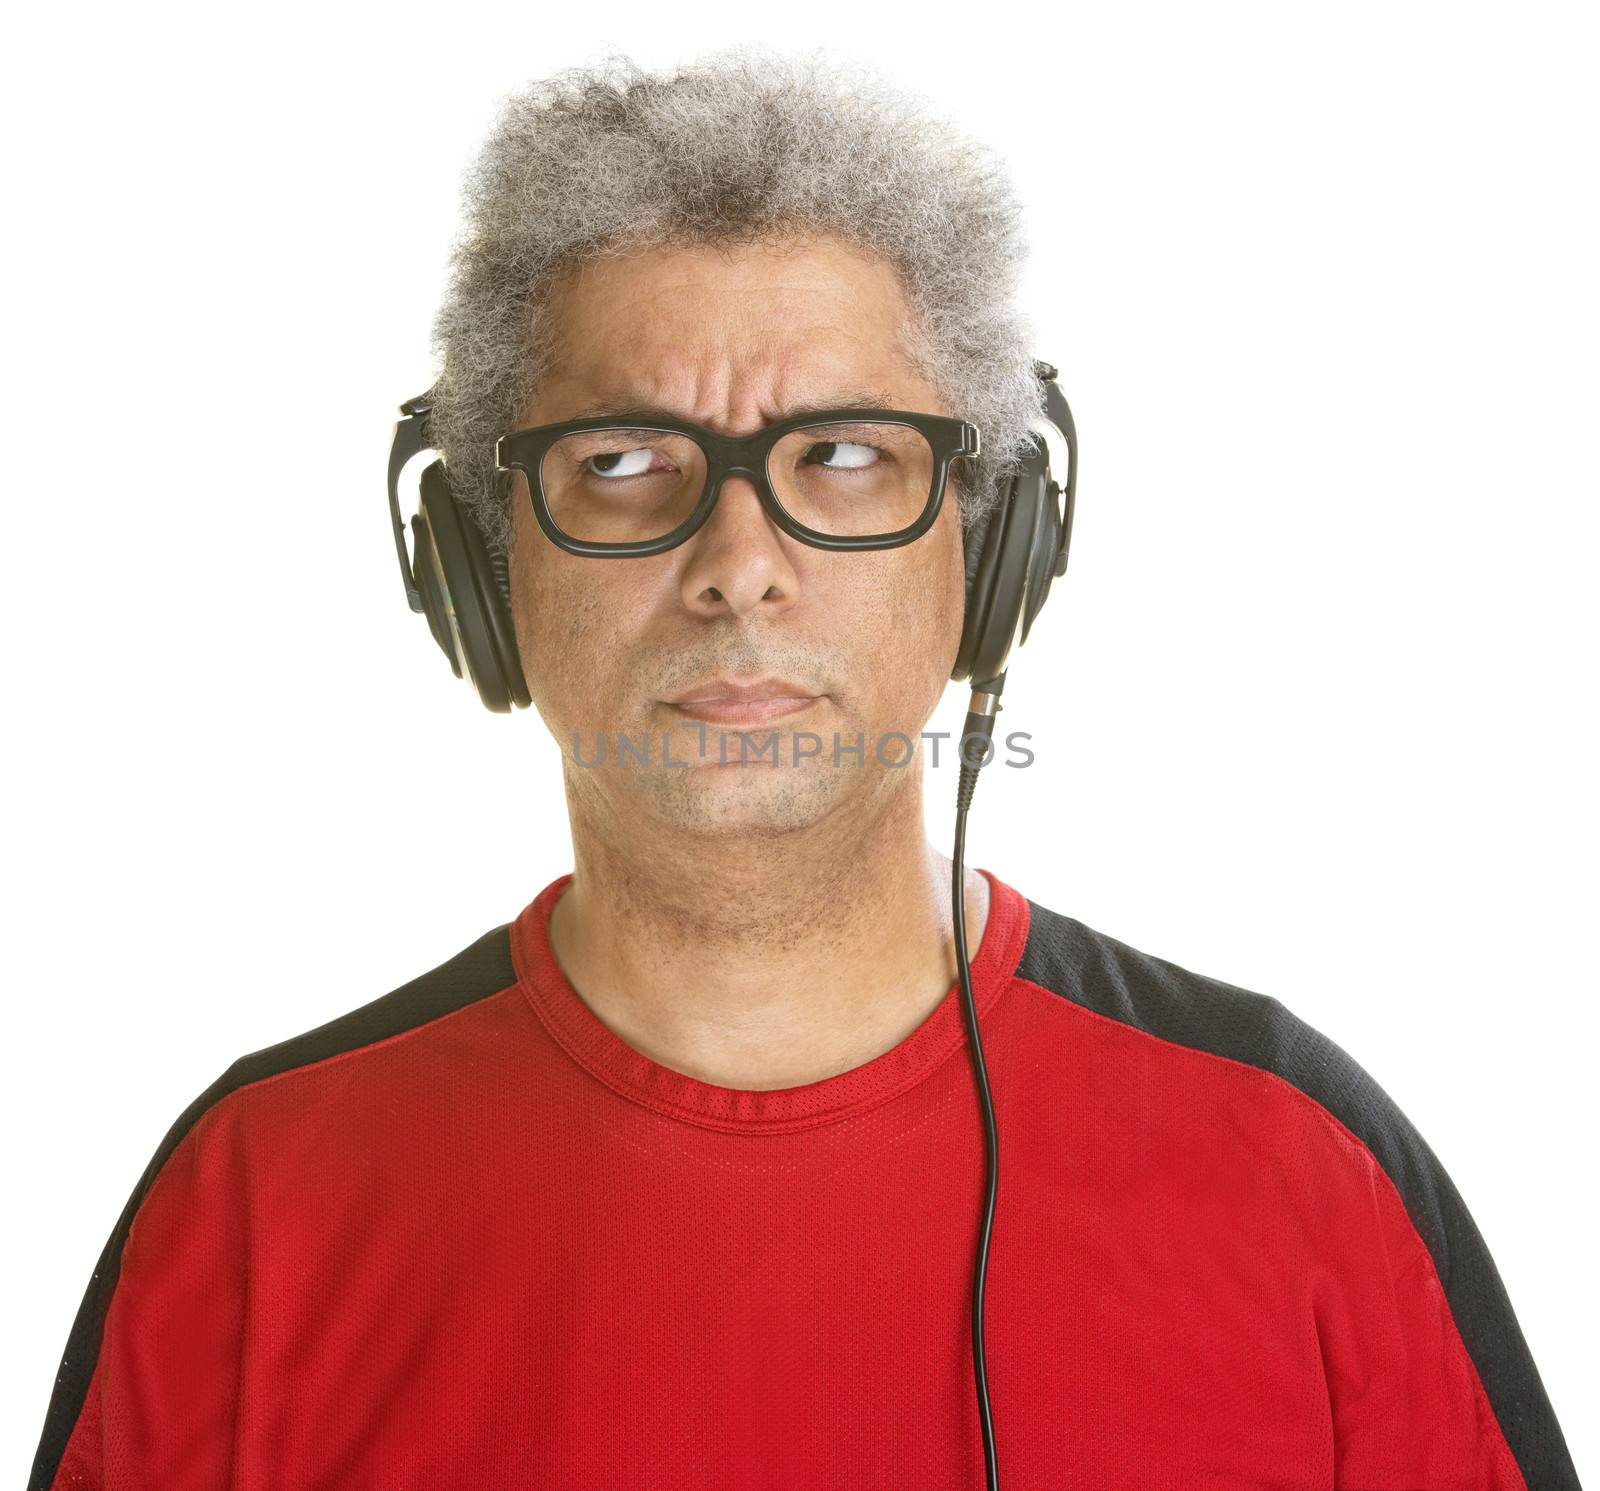 Bothered Black DJ with headphones on isolated background